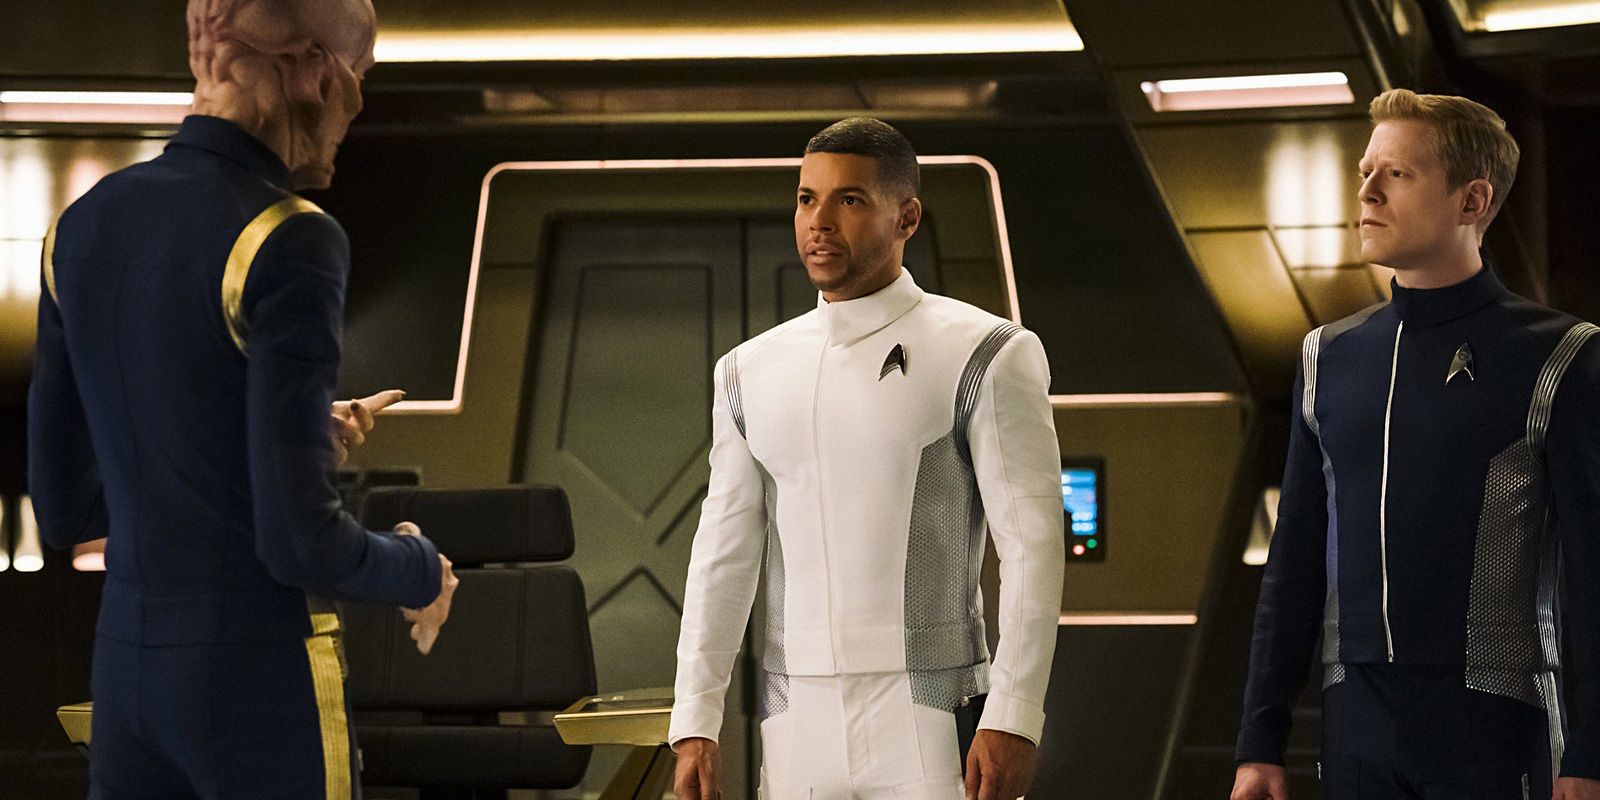 Culber, Saru, and Stamets in Star Trek: Discovery